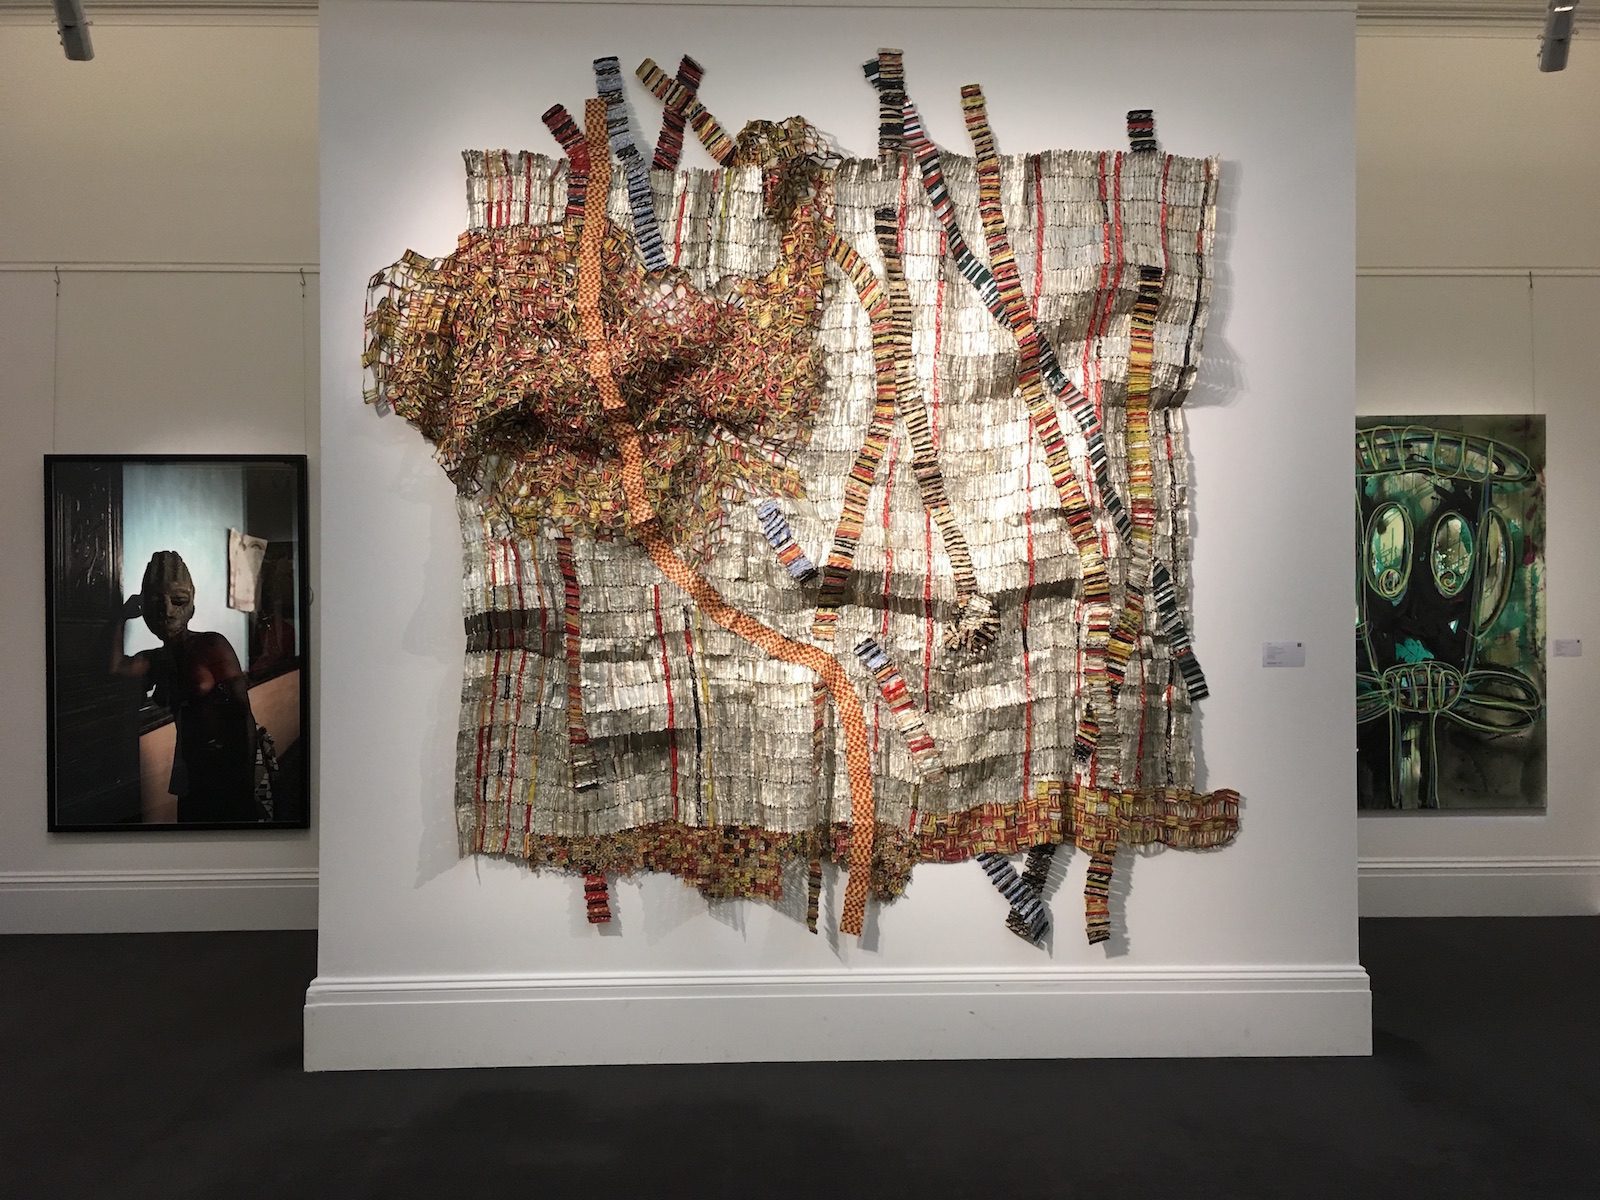 Works by Leonce Raphael Agbodjelou, El Anatsui, and Abdoulaye Diarrassouba (Aboudia) at the Sotheby’s Modern and Contemporary African Art Sale Exhibition, London, May 2017 © Patricia A. Banks